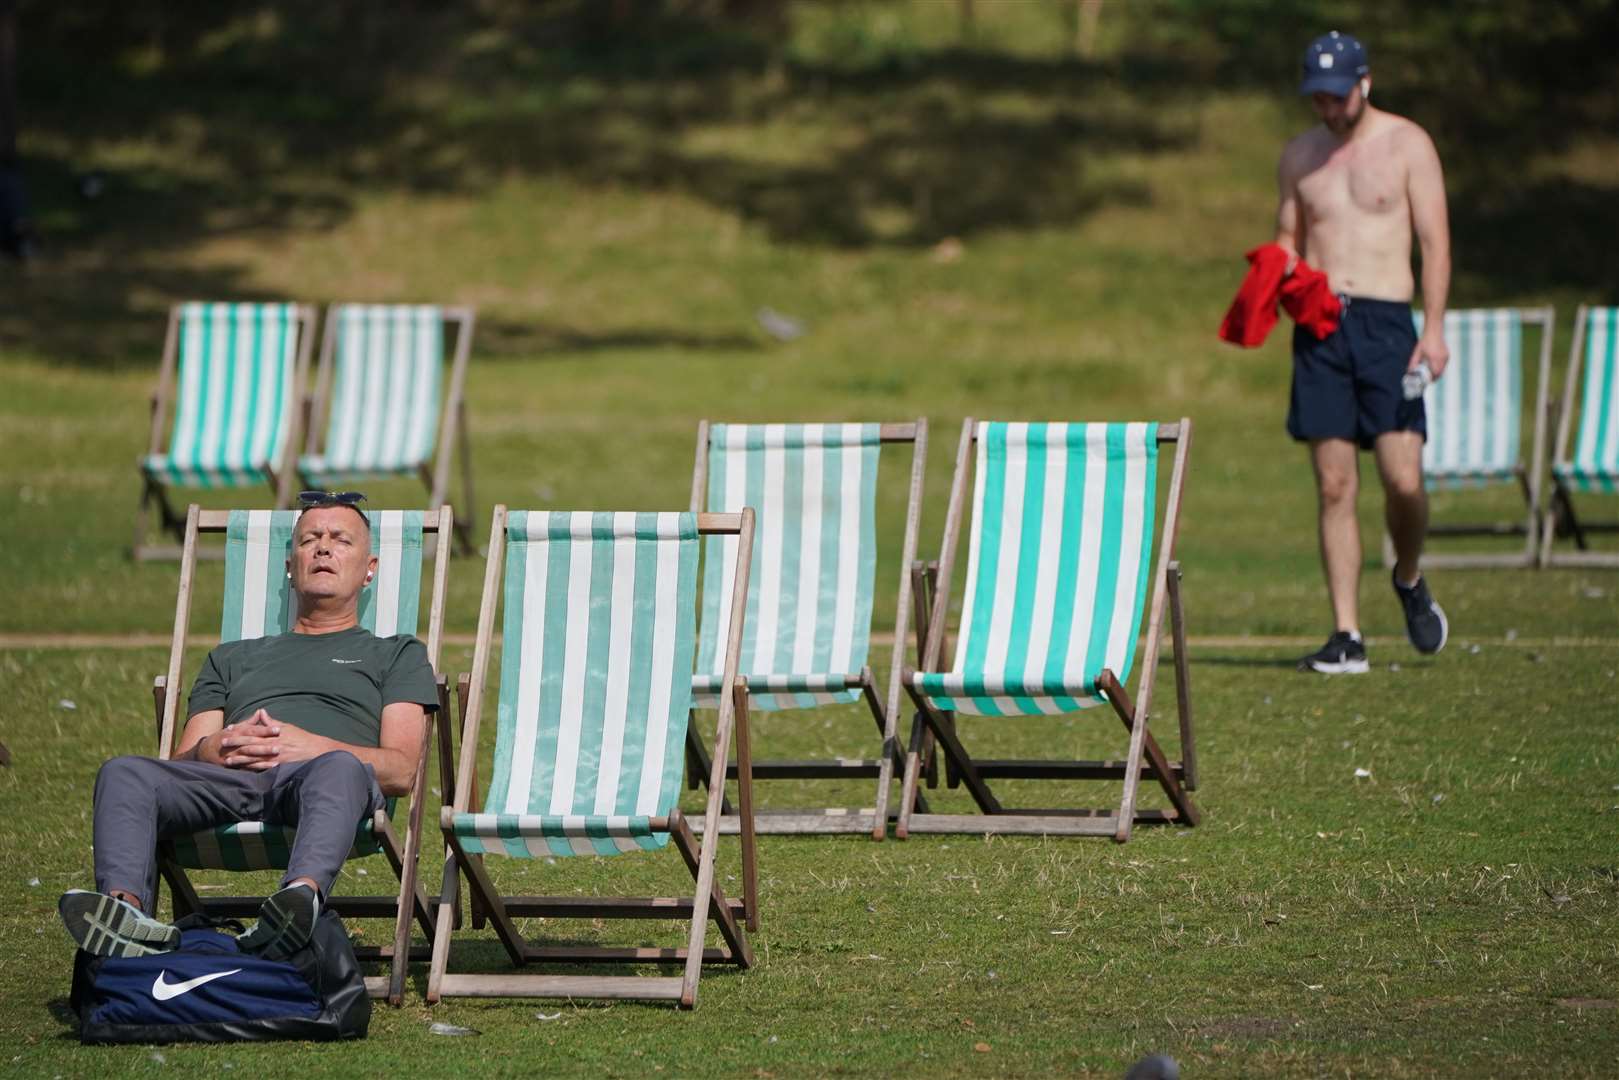 People enjoying the warm weather in Hyde Park in central London (Jonathan Brady/PA)